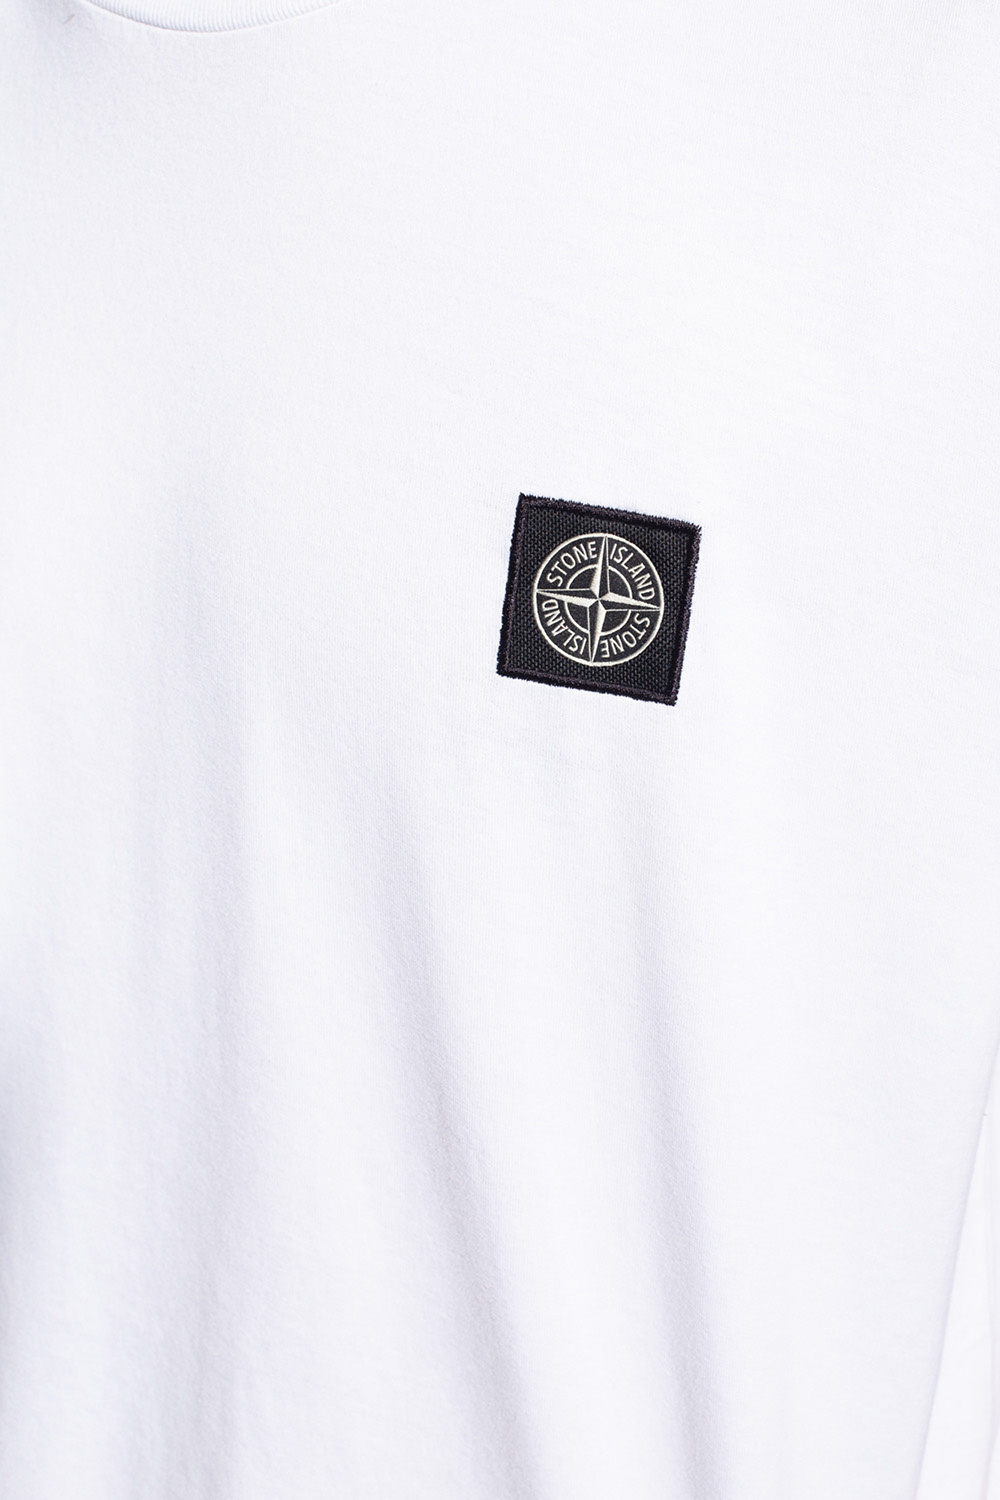 Stone Island Logo-patched T-shirt